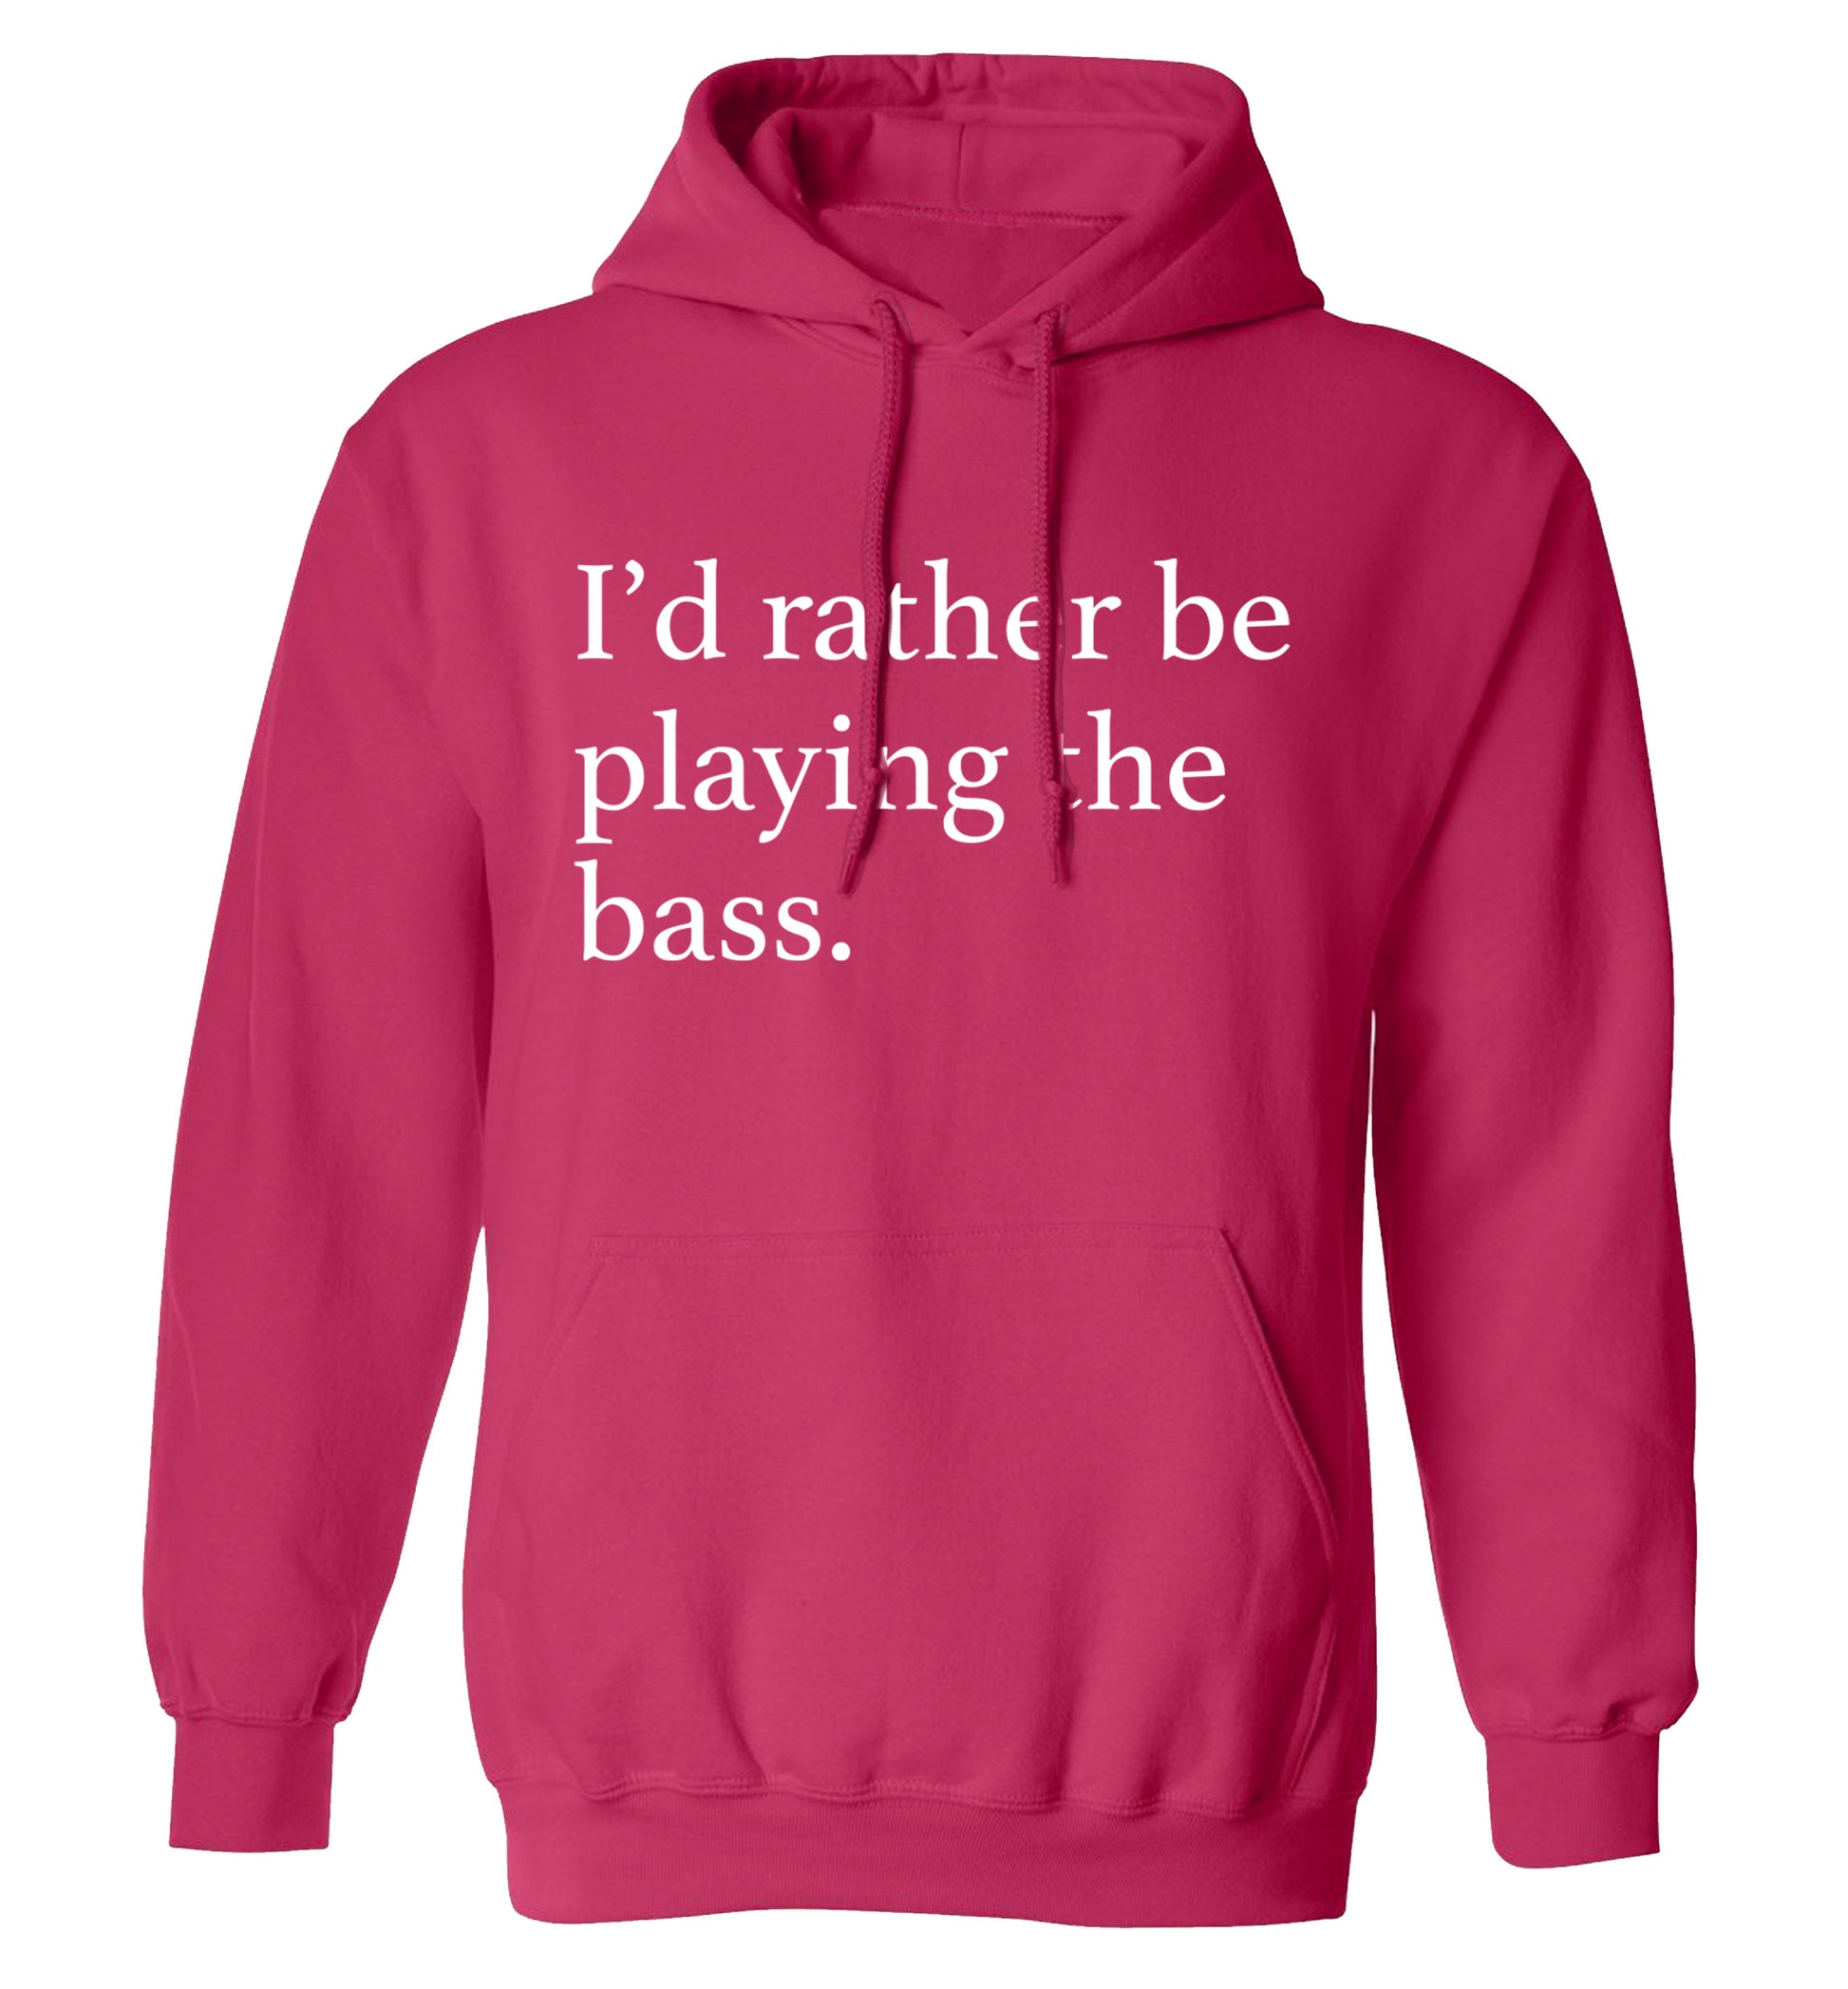 I'd rather by playing the bass adults unisex pink hoodie 2XL